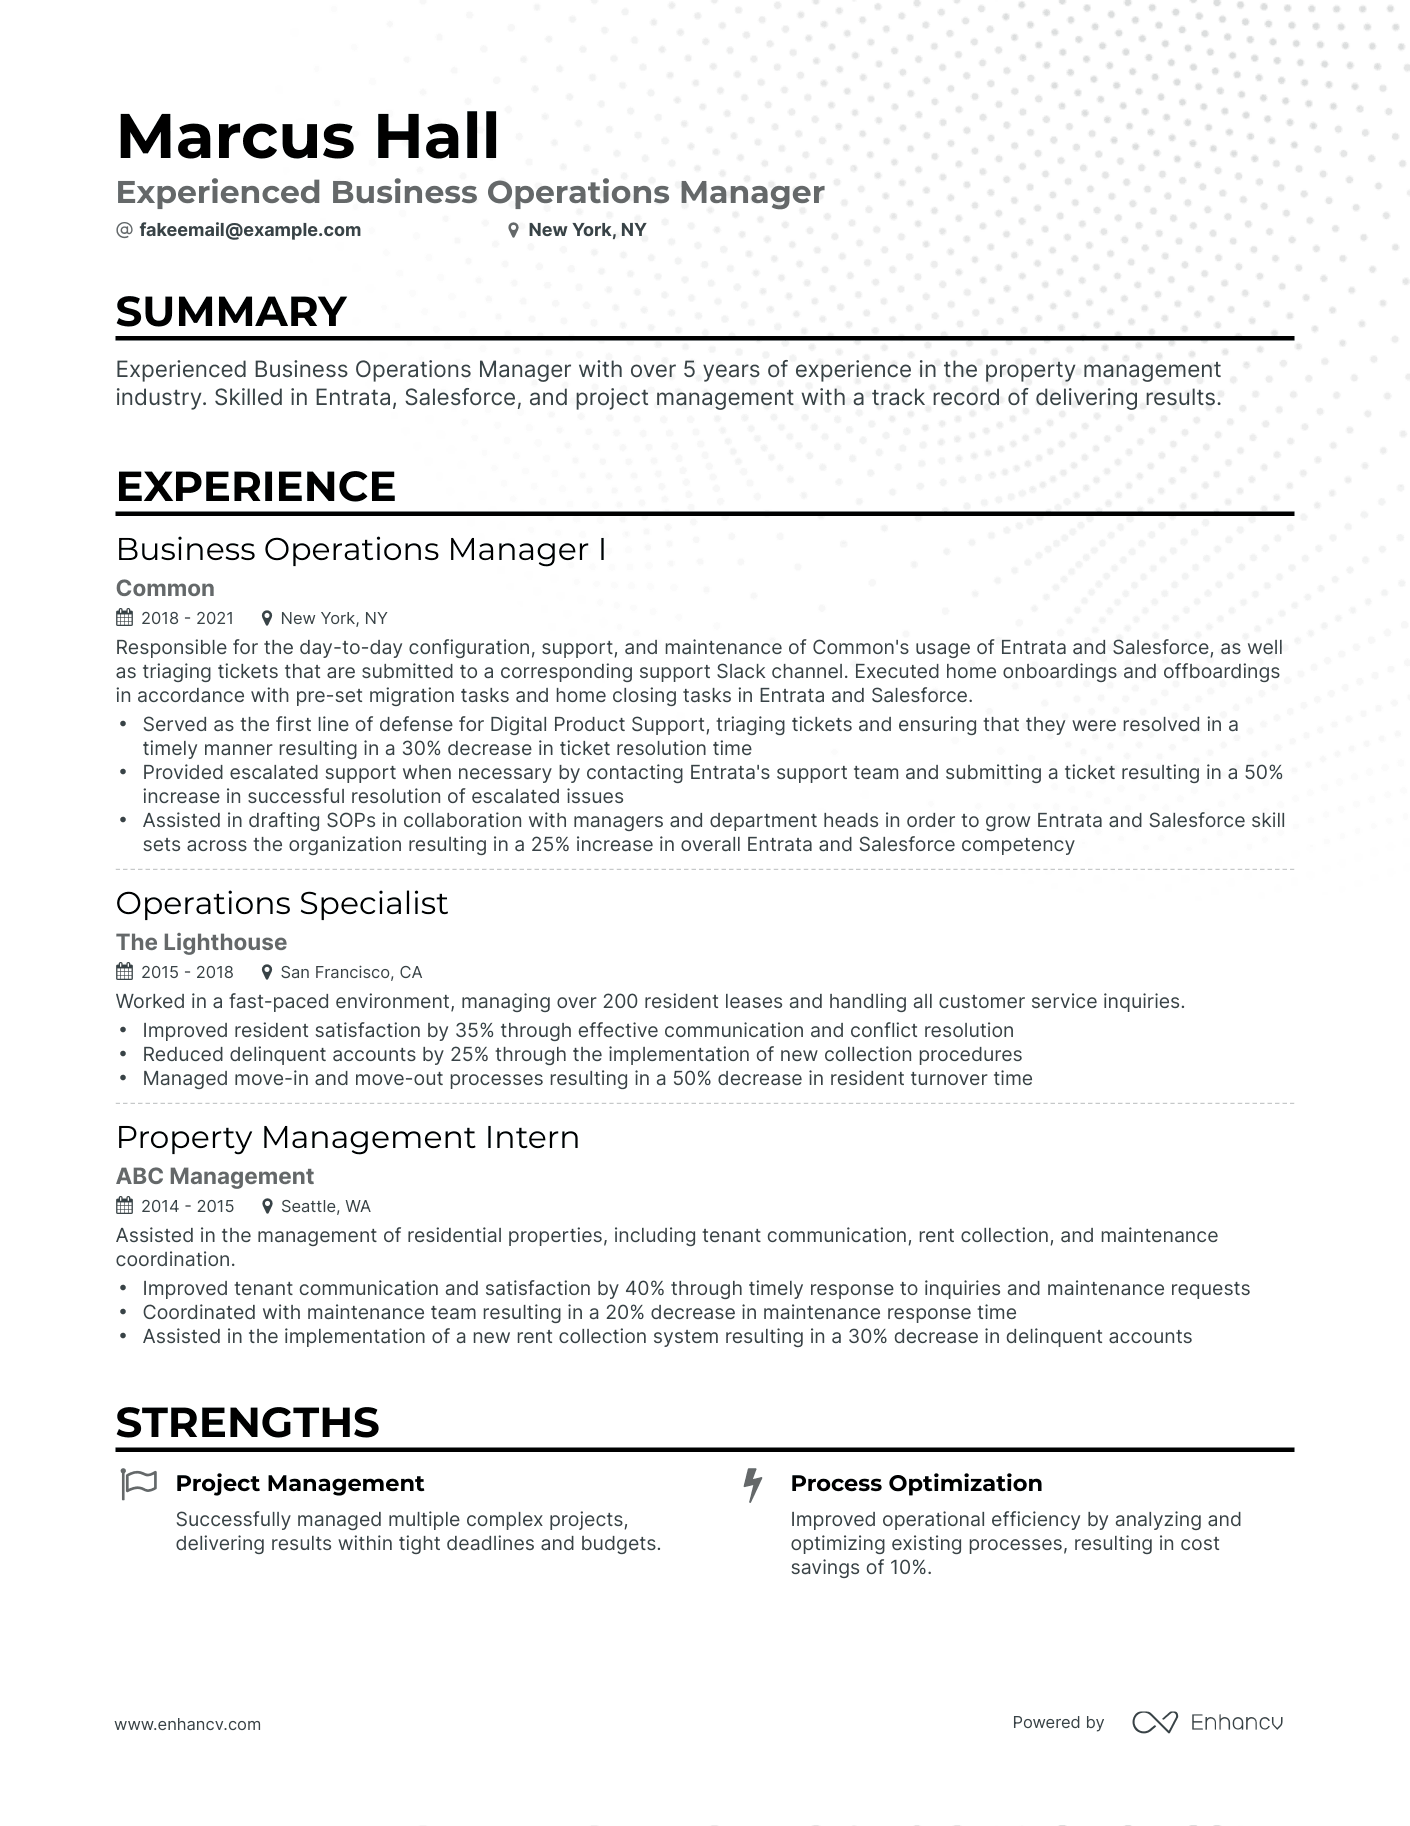 Classic Business Operations Manager Resume Template